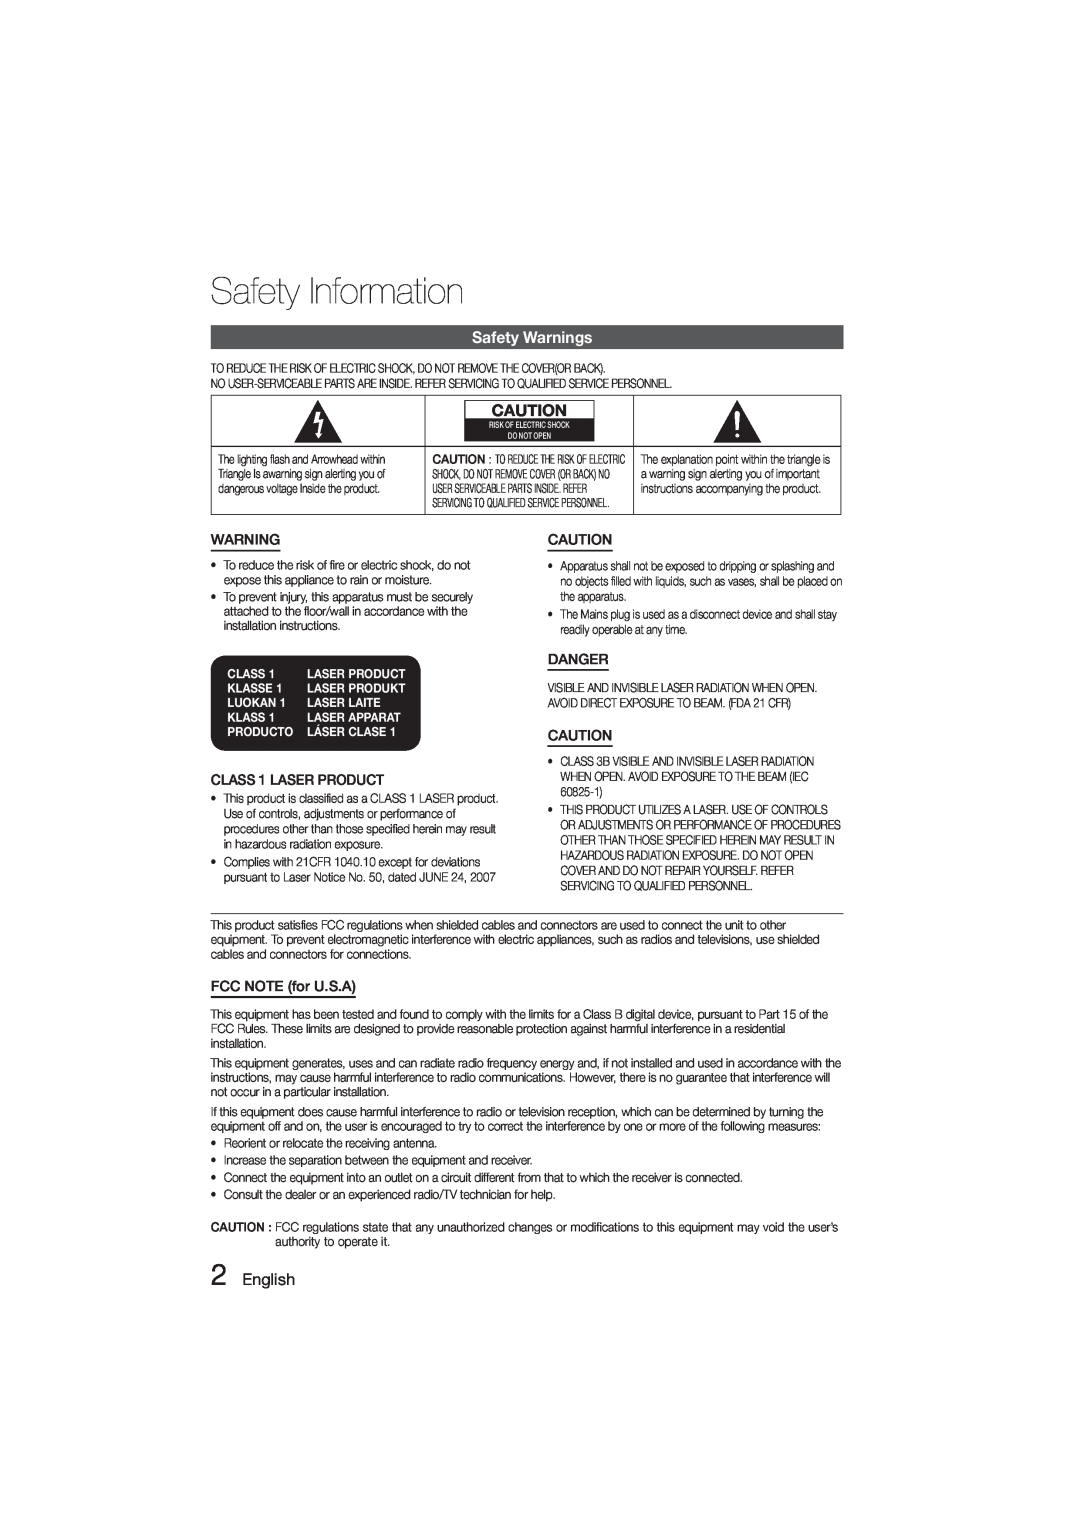 Samsung HT-E350 Safety Information, Safety Warnings, English, Class, Klasse, Luokan, Laser Laite, Laser Apparat, Producto 